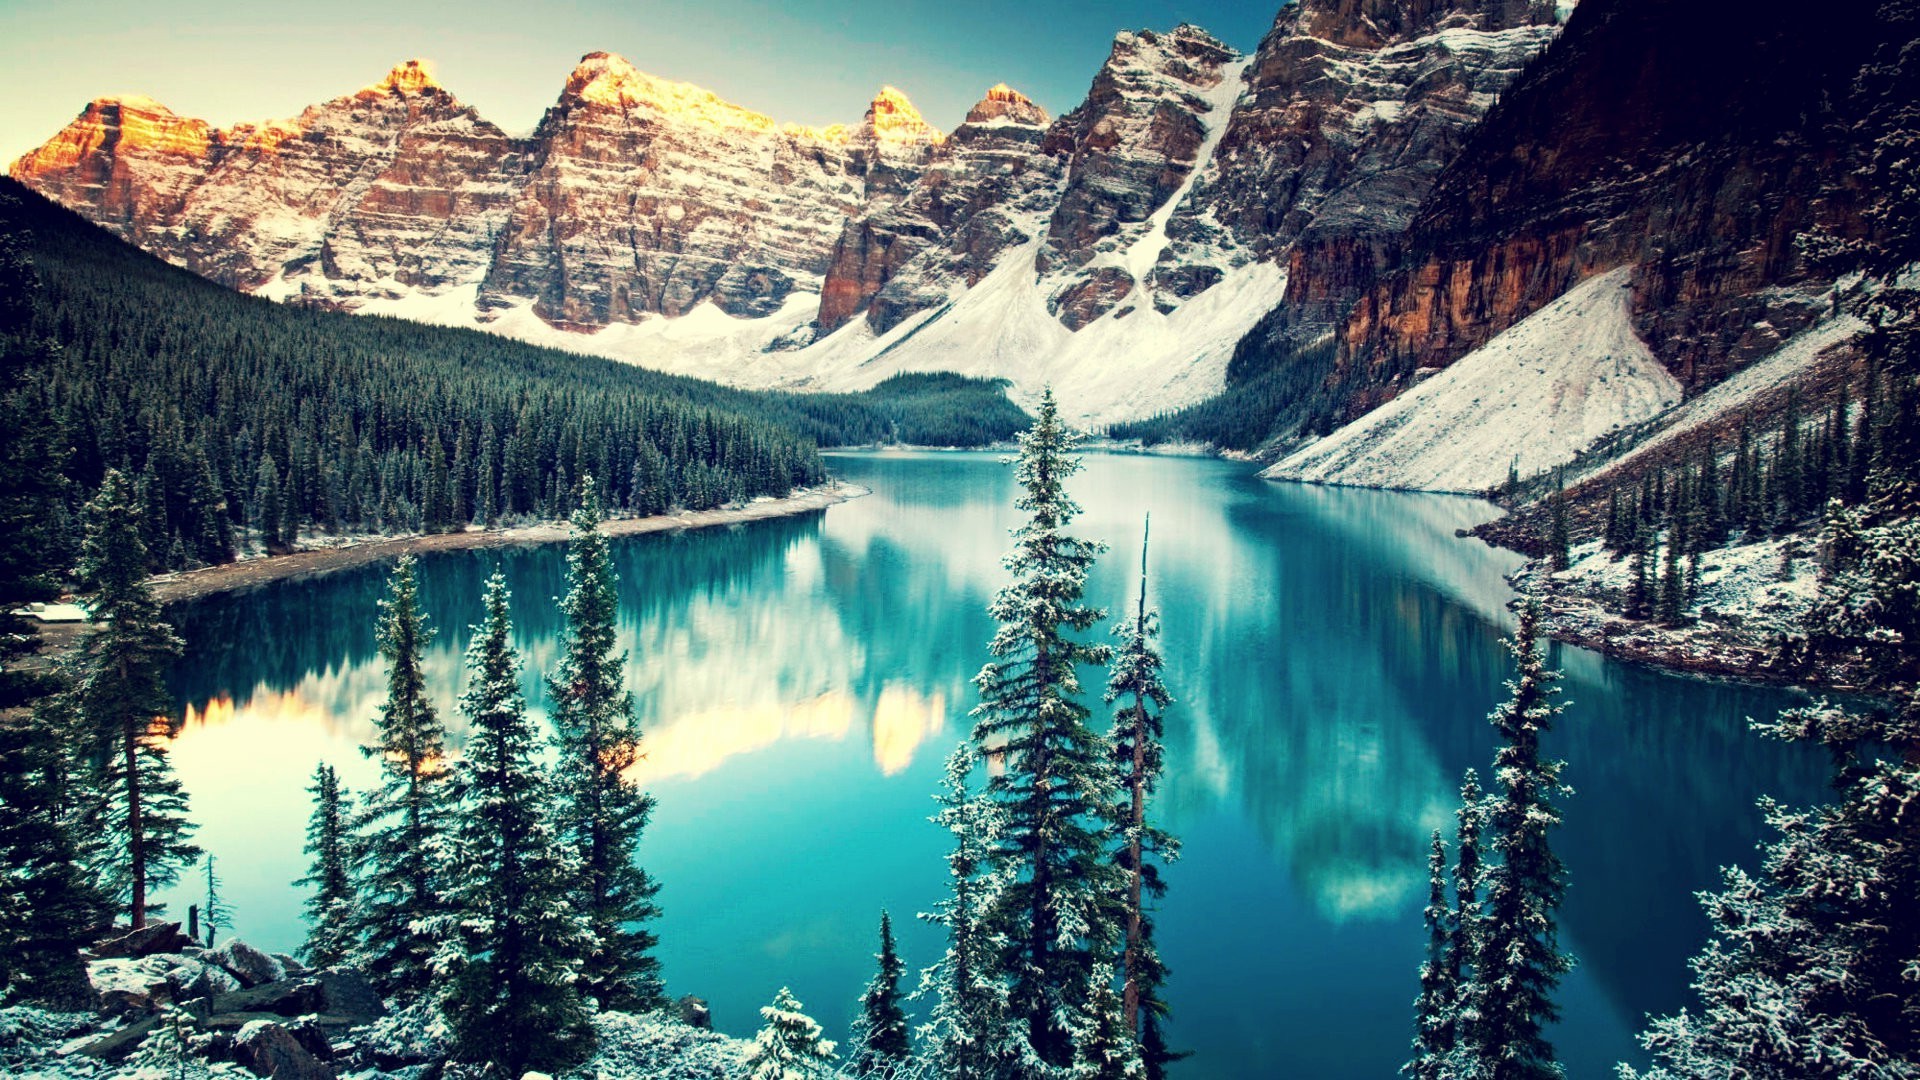 mountain, Trees, Snow, Water, Moraine Lake, Canada, Lake, Forest, Pine Trees, Banff National Park, Valley Wallpaper